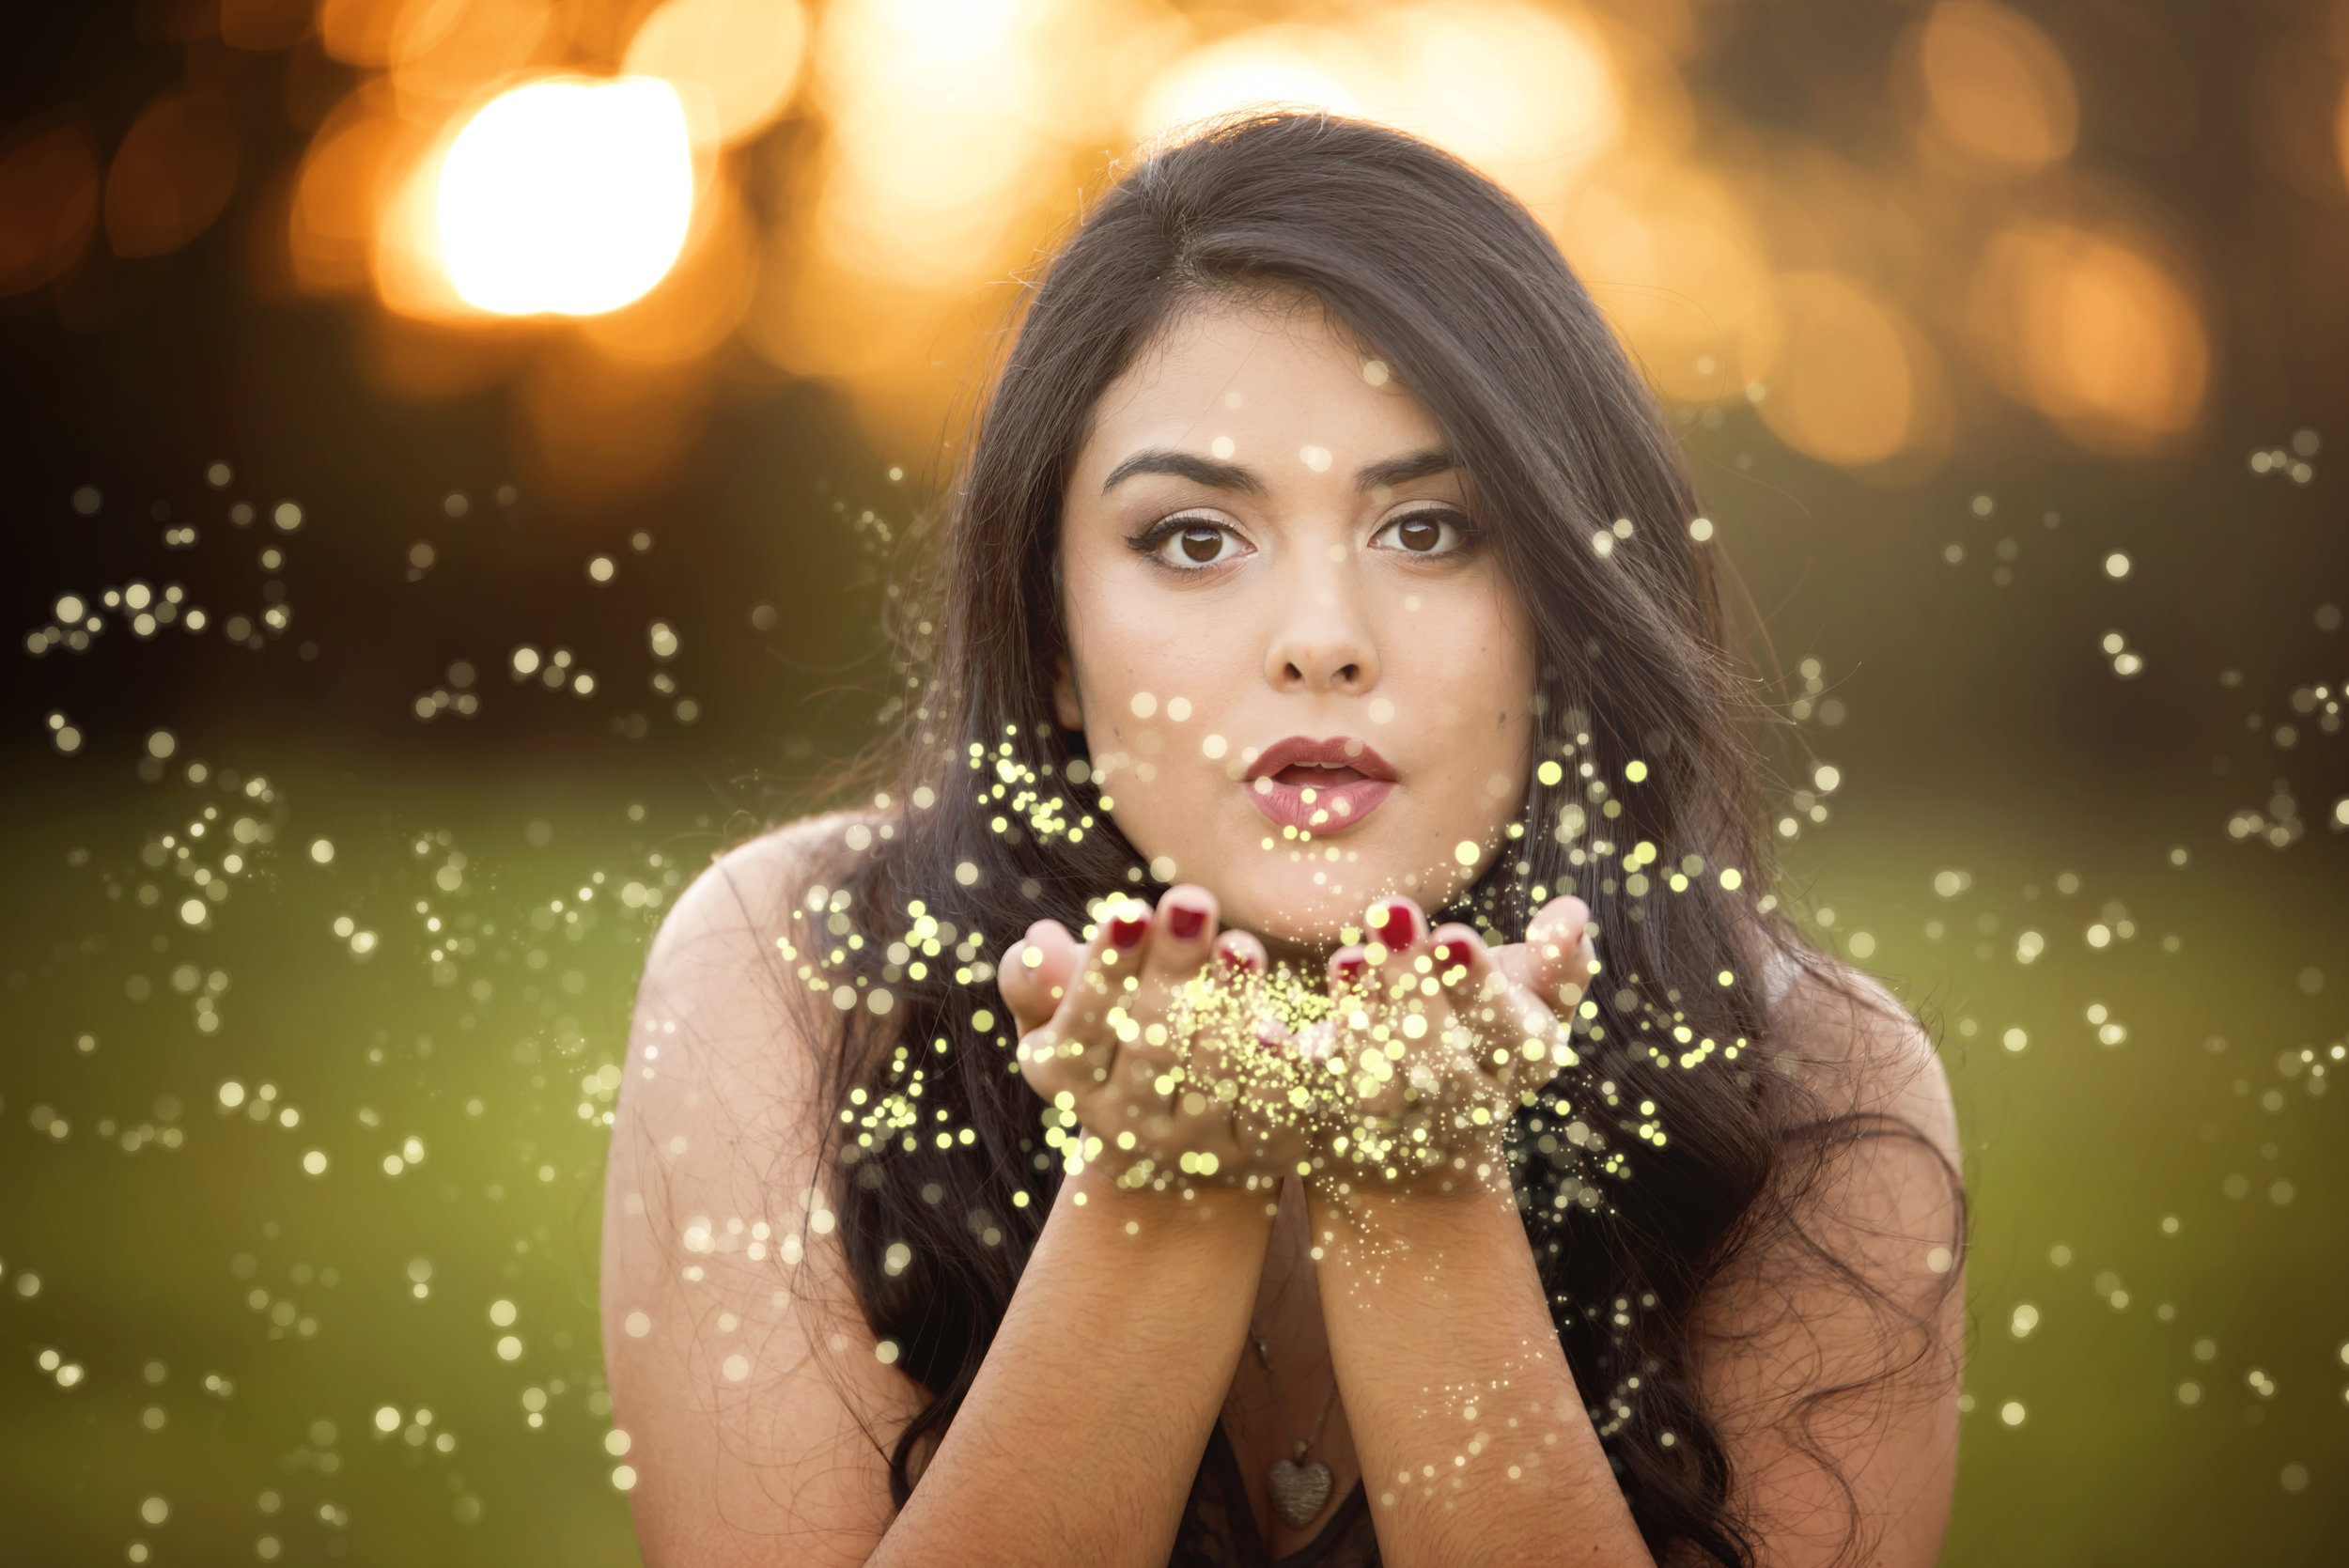  Portrait with light from sunset in the background, woman blowing on dandelions cupped in her hands.  